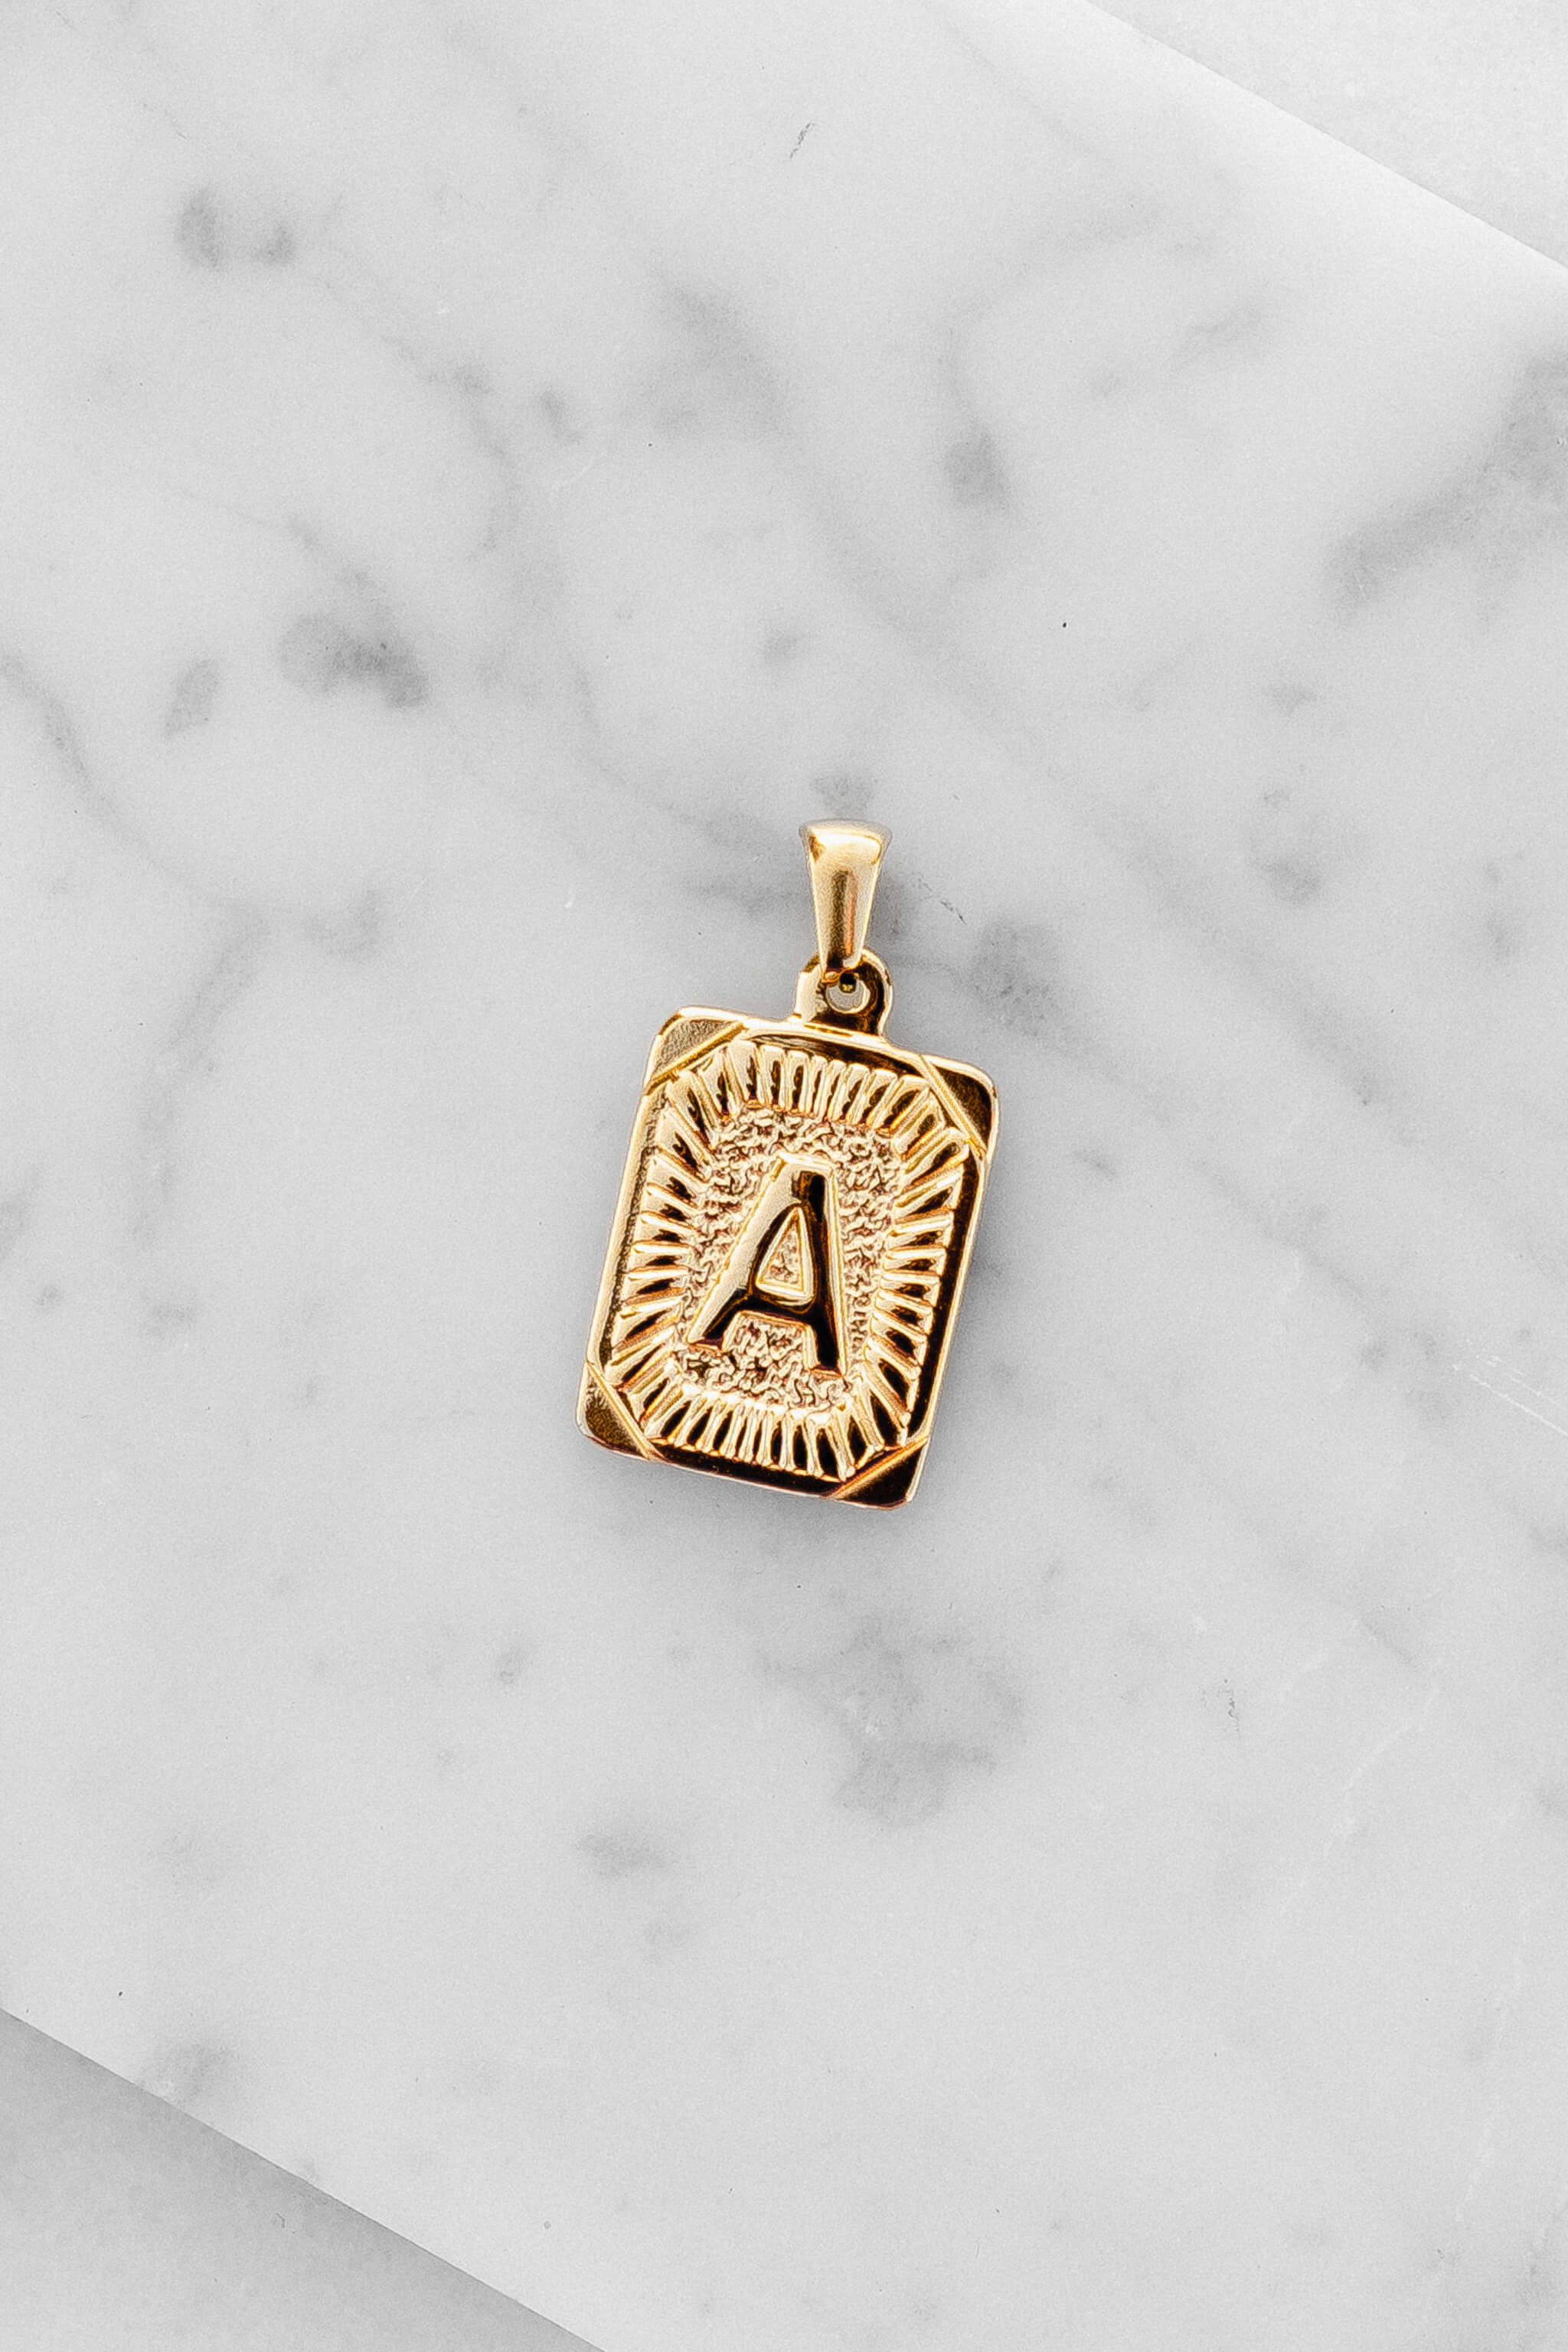 Gold Monogram Letter "A" Charm laying on a marble